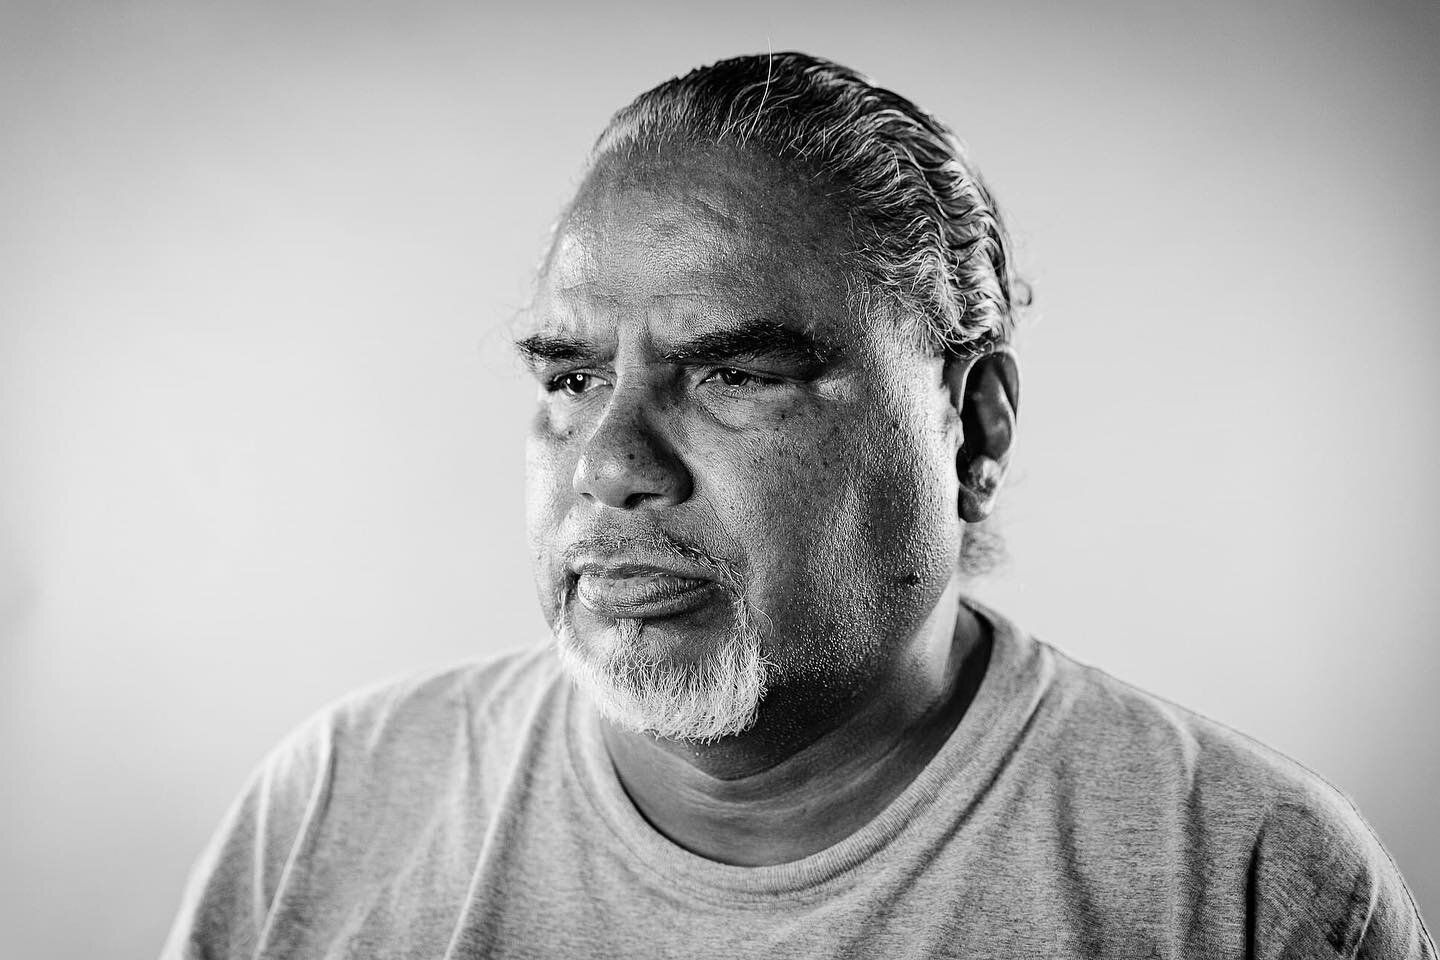 Power of Portraits

This is Albert. I took this 5 years ago in KC at a homeless shelter. He was the first homeless veteran I was able to get in front of the camera. This took about 9 months of talking to these guys and gaining some trust before I eve